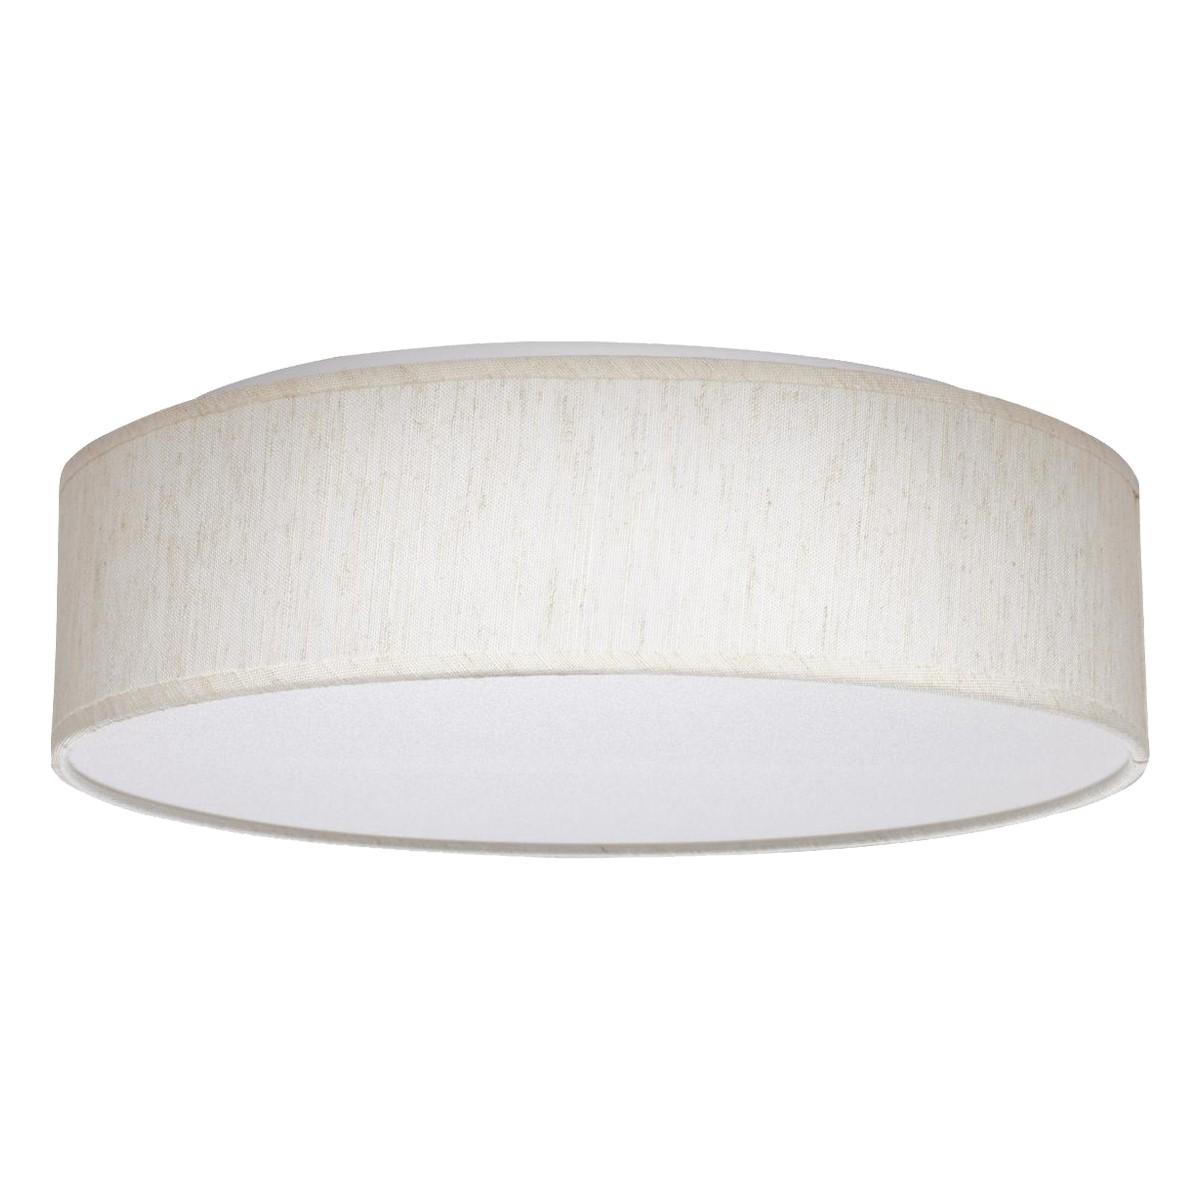 Nuvo 15 In Led Flush Mount Ceiling